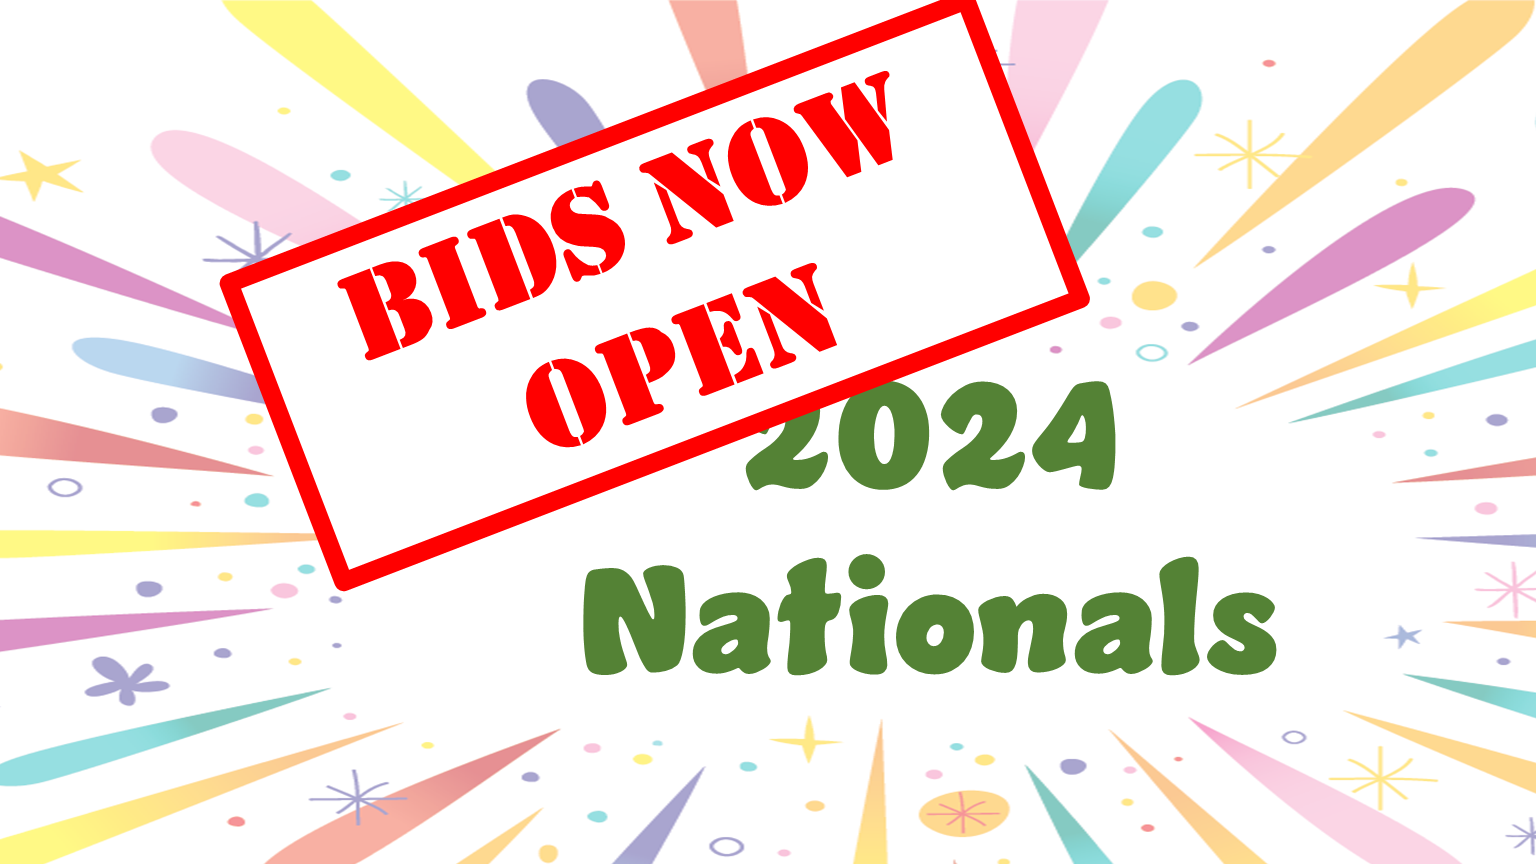 Bids for 2024 Nationals